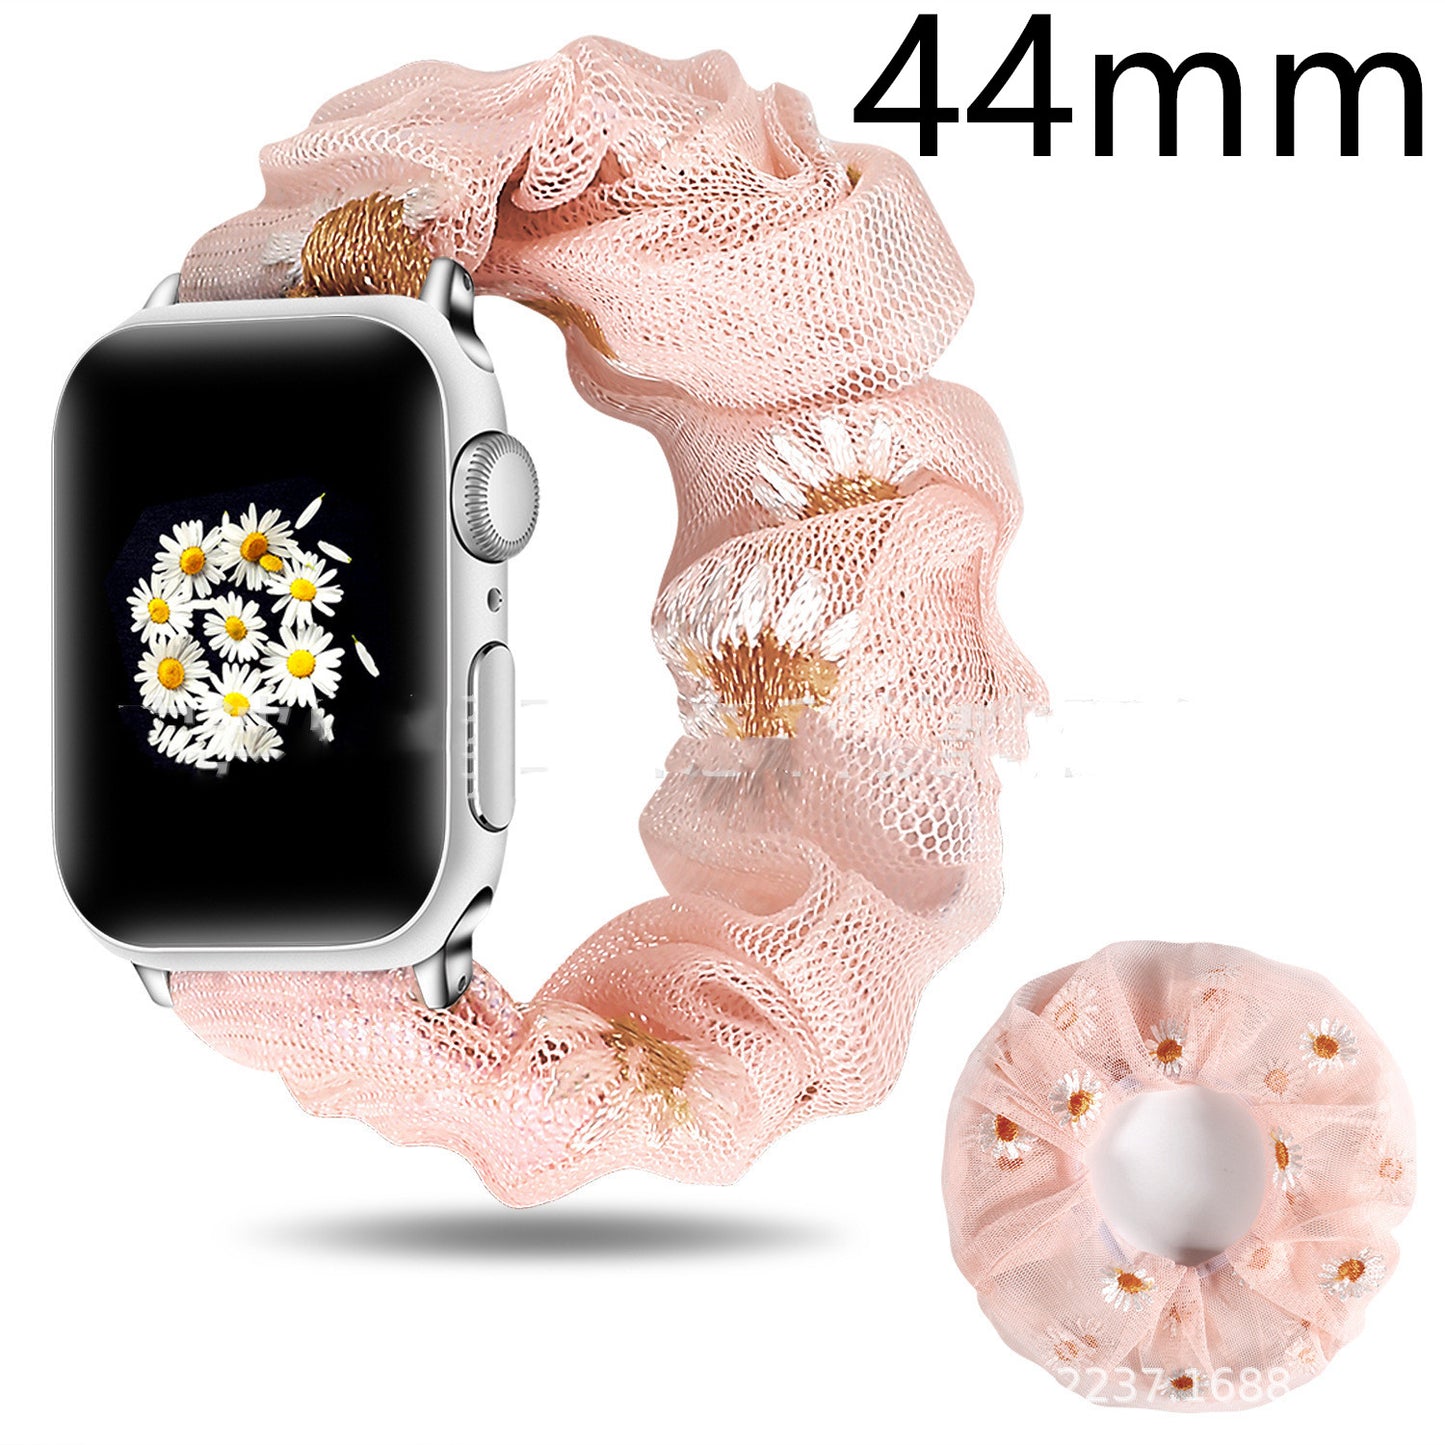 Calico Hair Tie and Apple Watch Band Set